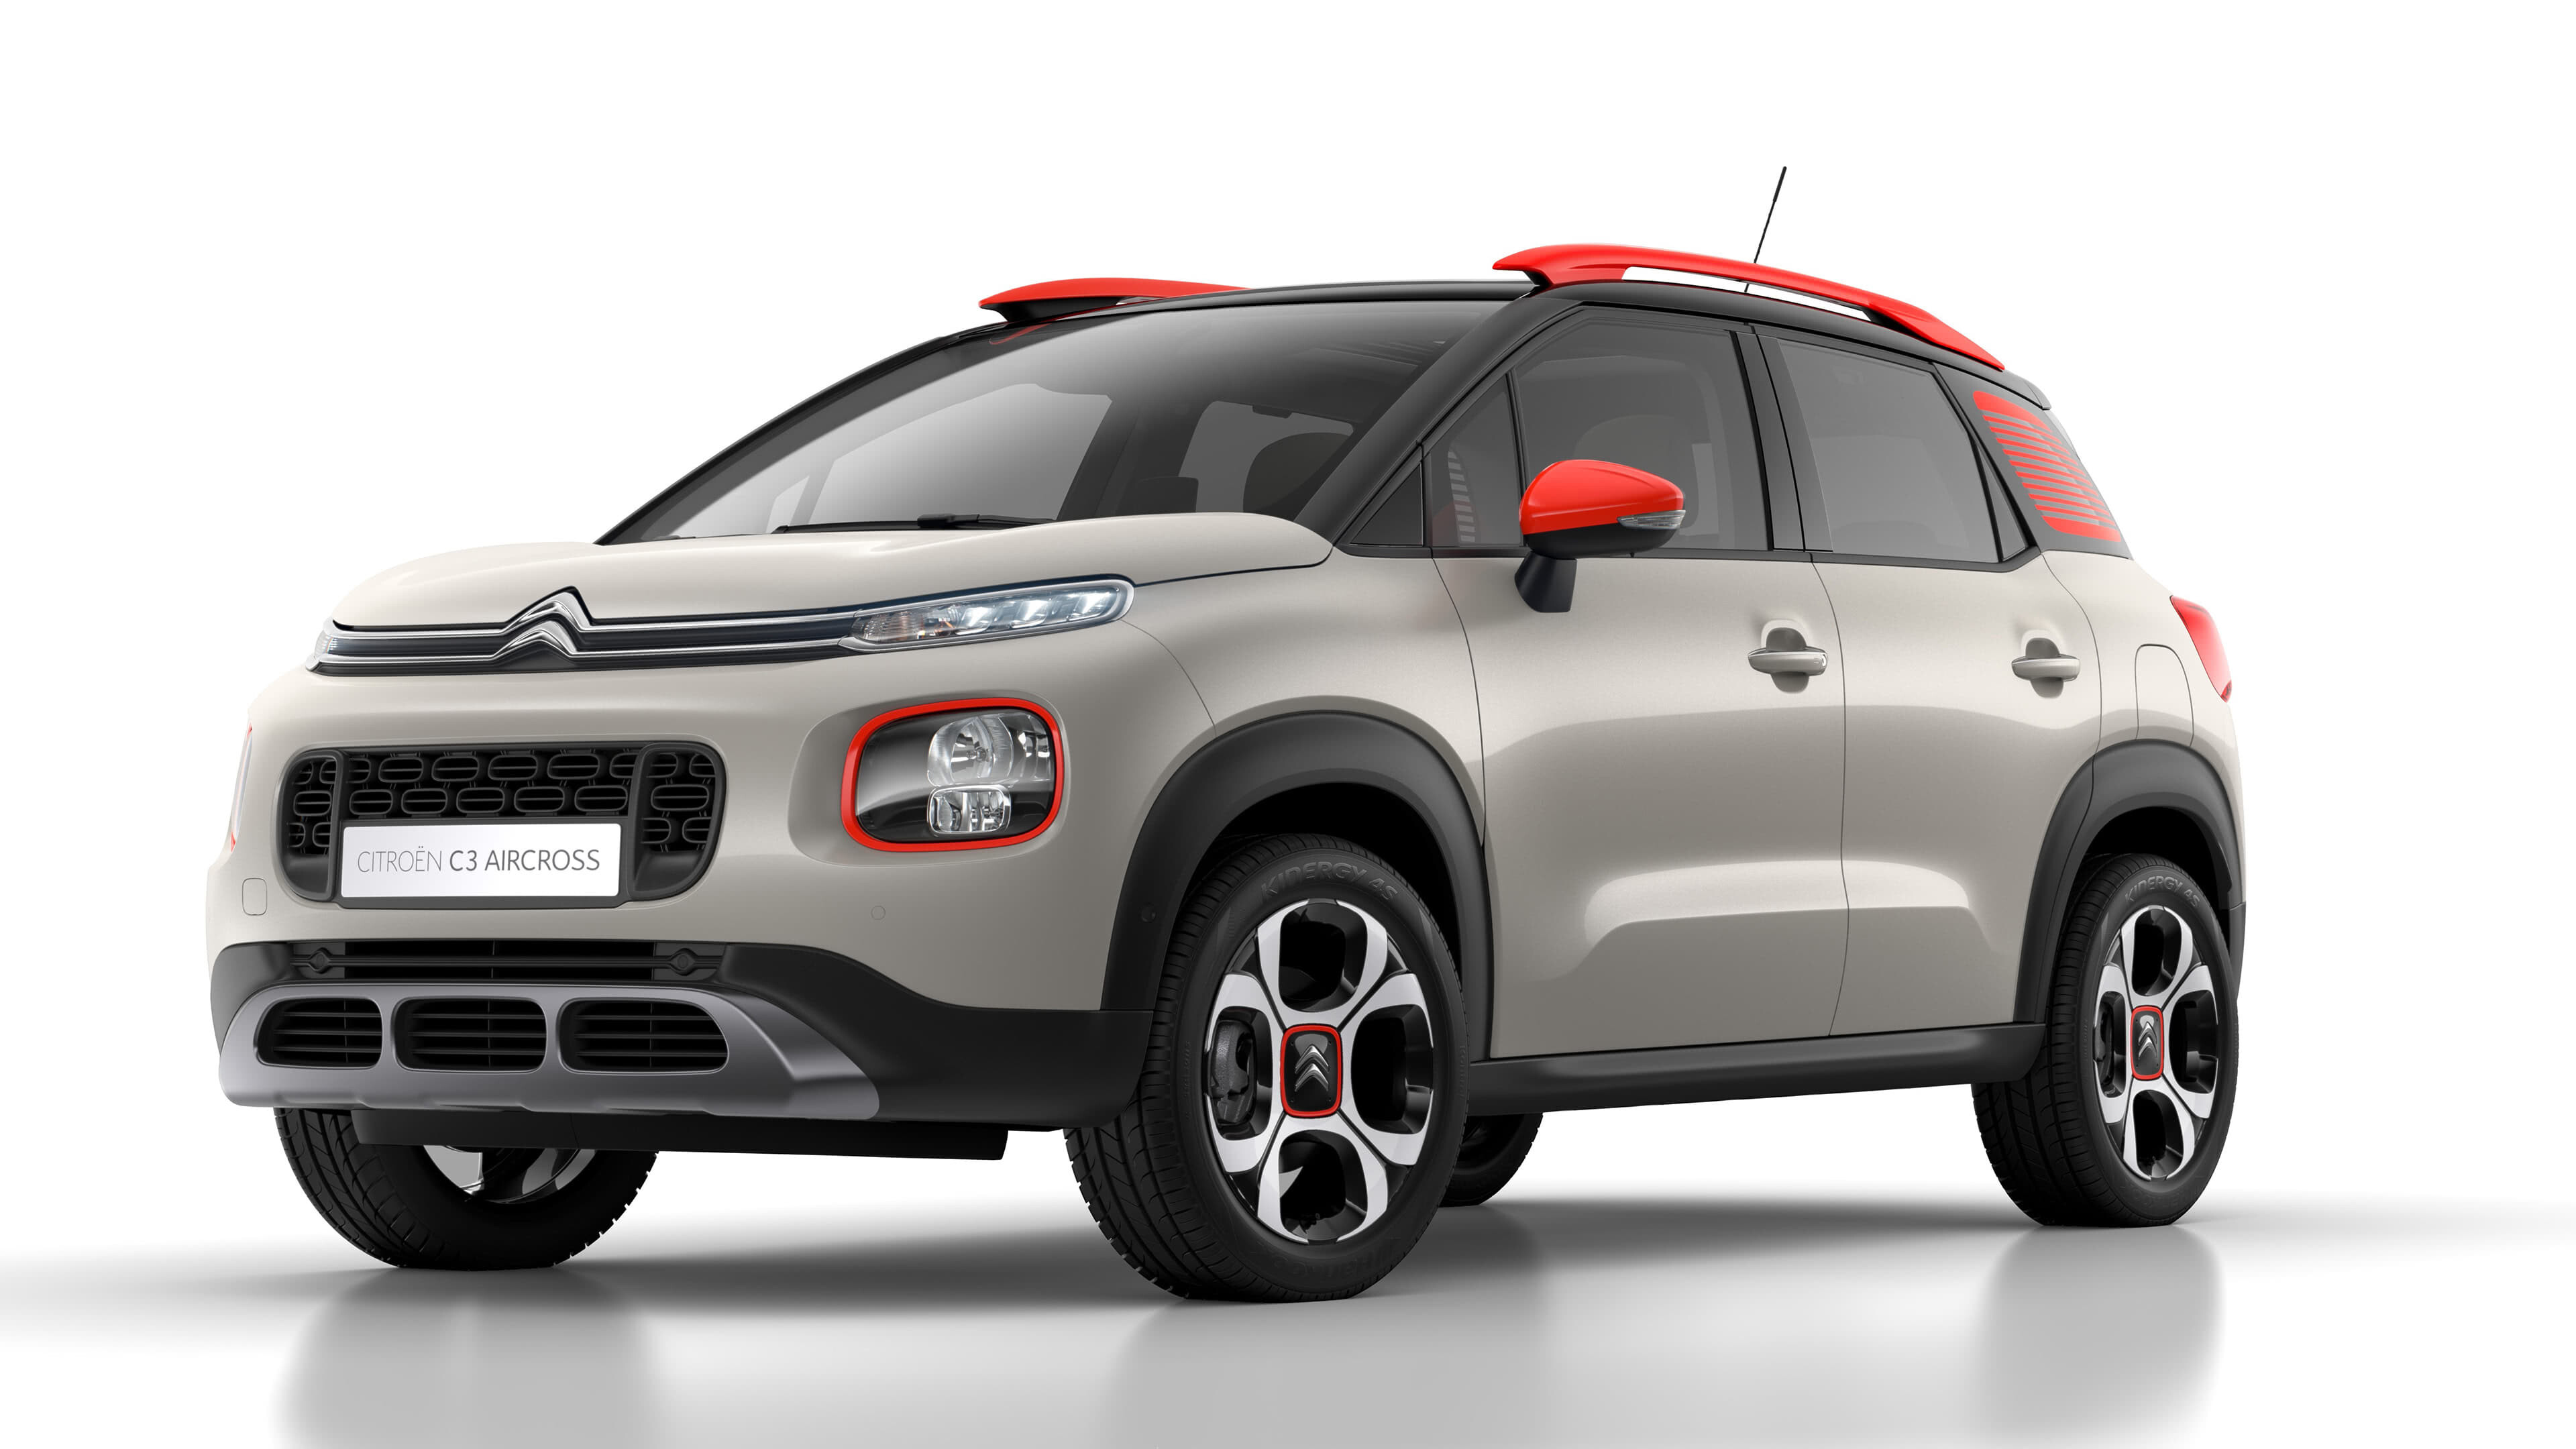 Citroen: Model C3 Aircross, Company's head office is located in the Stellantis Poissy Plant. 3840x2160 4K Wallpaper.